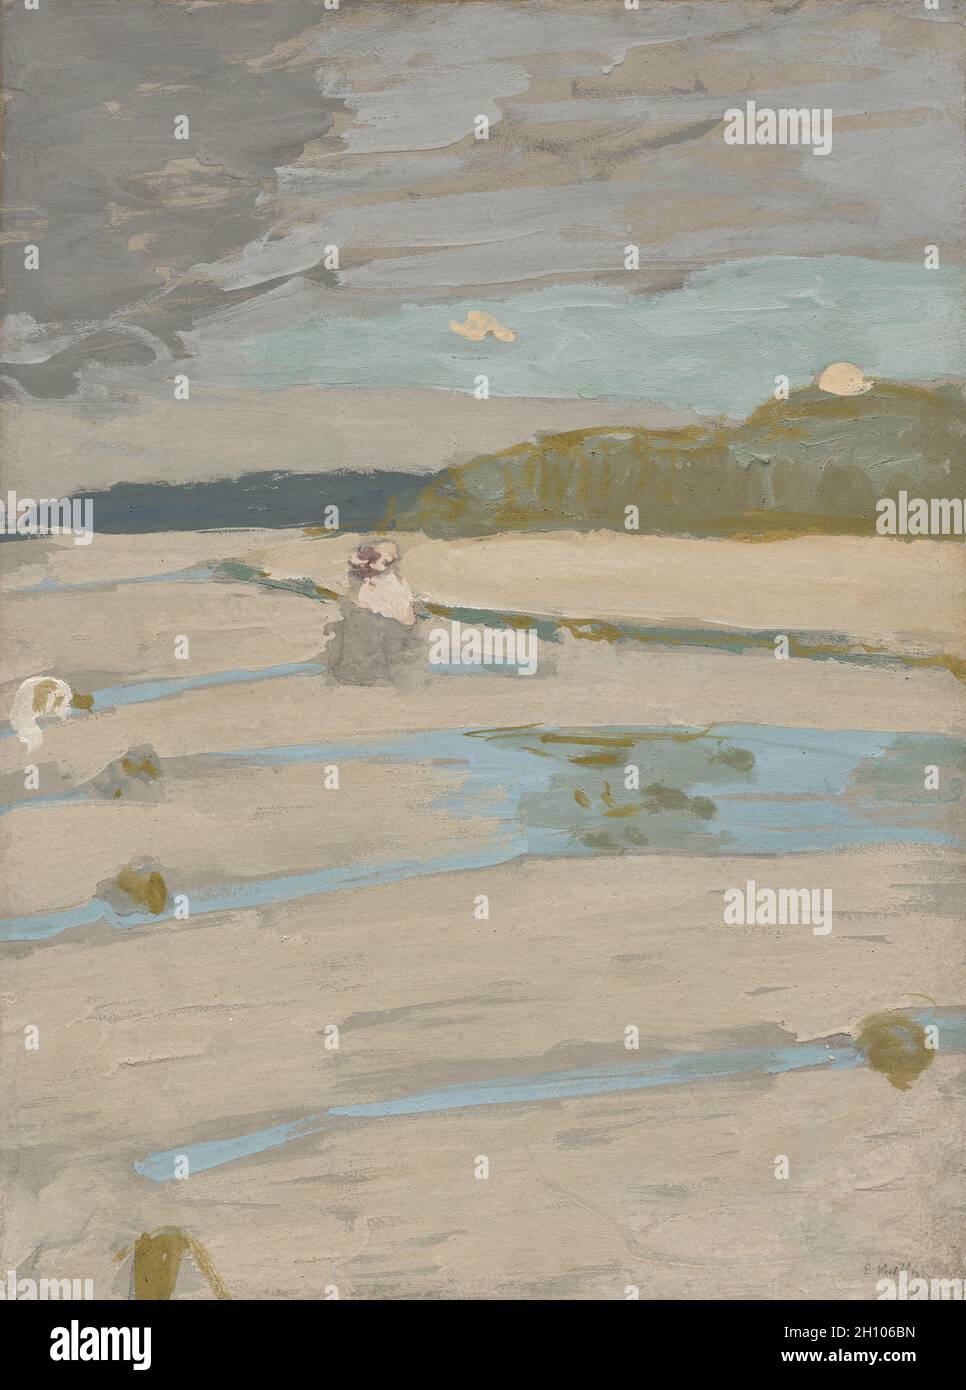 The Beach at Saint-Jacut, 1909. Edouard Vuillard (French, 1868-1940). Distemper on paper, laid down on canvas; image and sheet: 57.8 x 43.2 cm (22 3/4 x 17 in.); mounted: 58.7 x 44.3 cm (23 1/8 x 17 7/16 in.).  Édouard Vuillard spent the summer of 1909 in the French coastal town of Saint-Jacut de la Mer, known for its beaches and bathing. Sharing housing with a group of artist friends, Vuillard sketched and painted avidly, depicting the seascape in several works including this drawing. Here, the artist emphasized the remoteness of the beach, depicting a woman sitting alone, wearing a gray dres Stock Photo